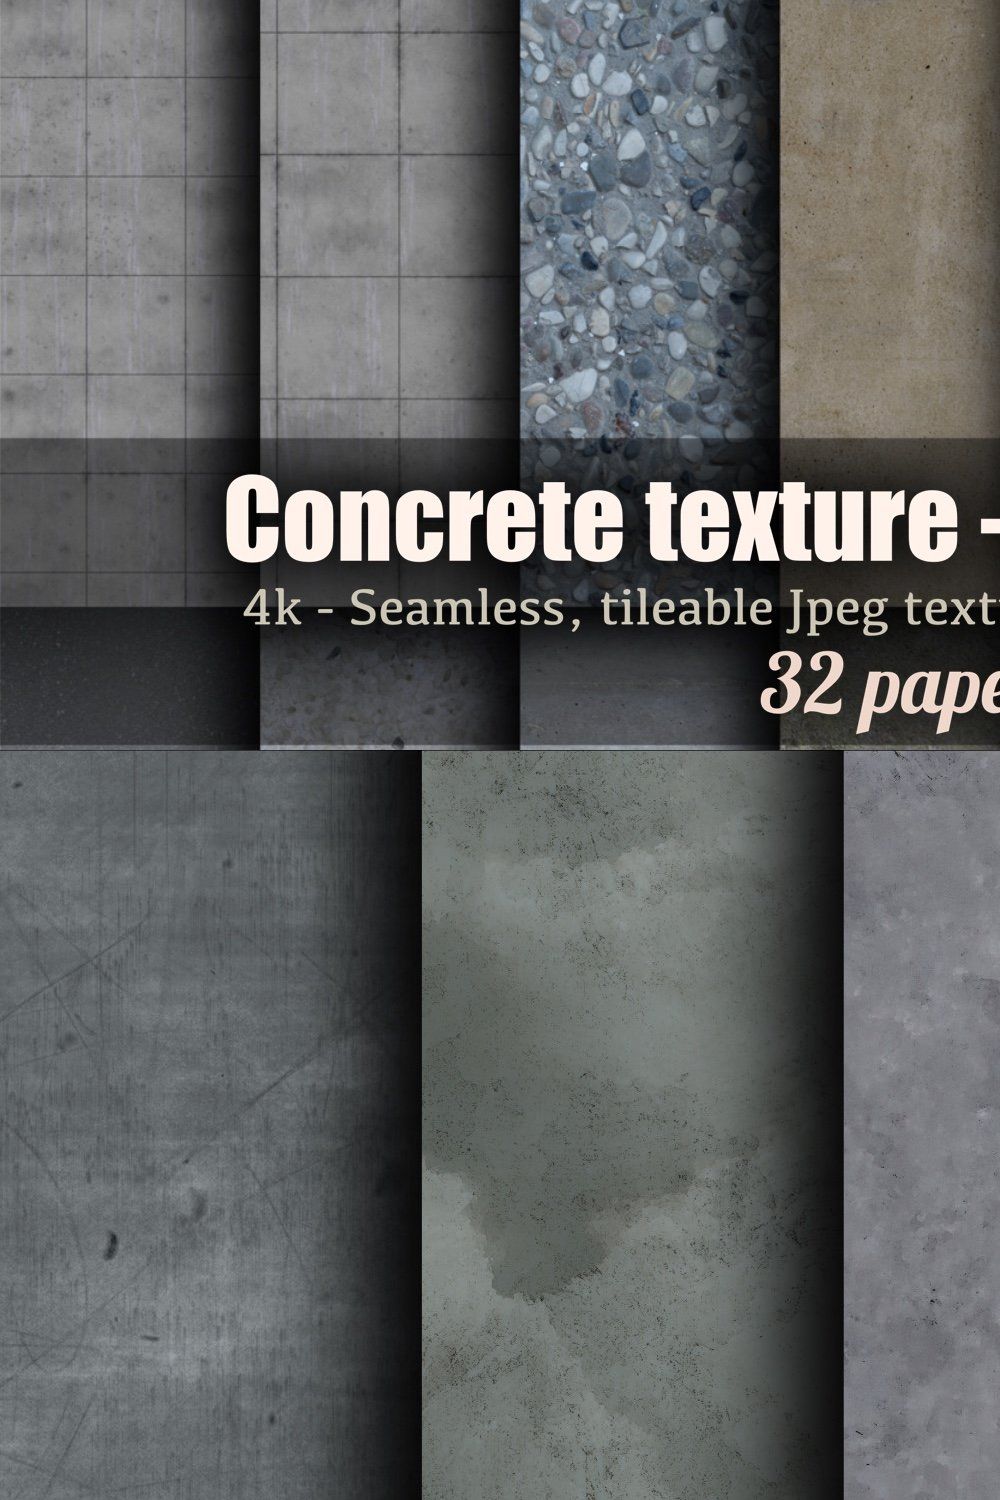 Concrete textured scrapbook papers pinterest preview image.